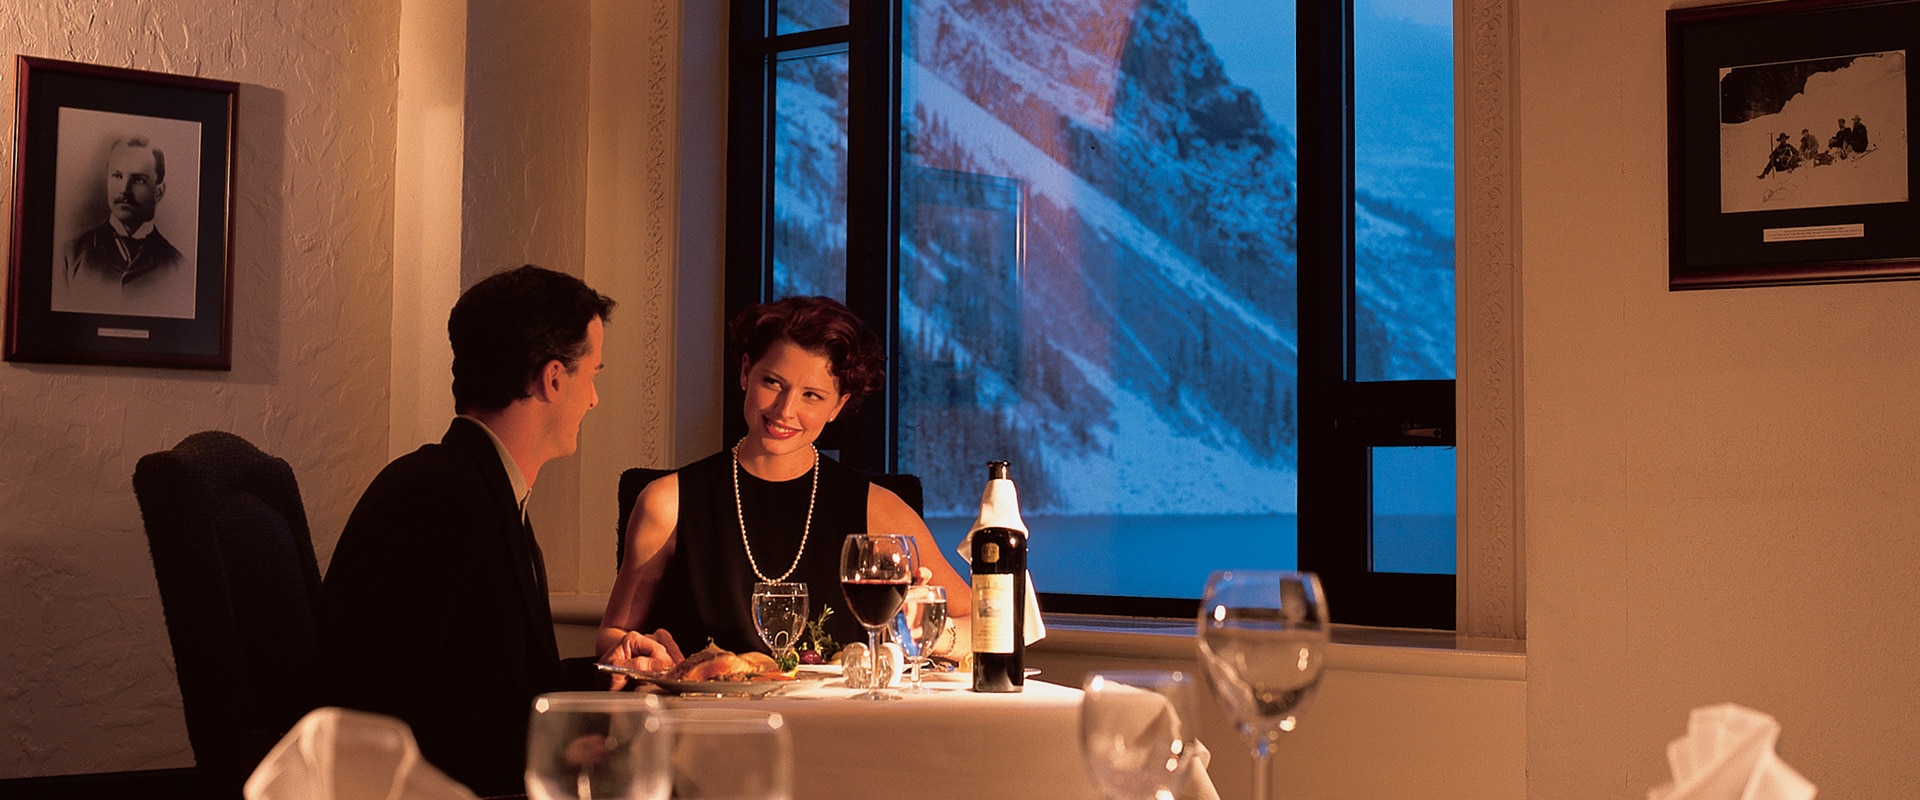 Couple dining in a restaurant during winter at the Fairmont Chateau Lake Louise, Canada